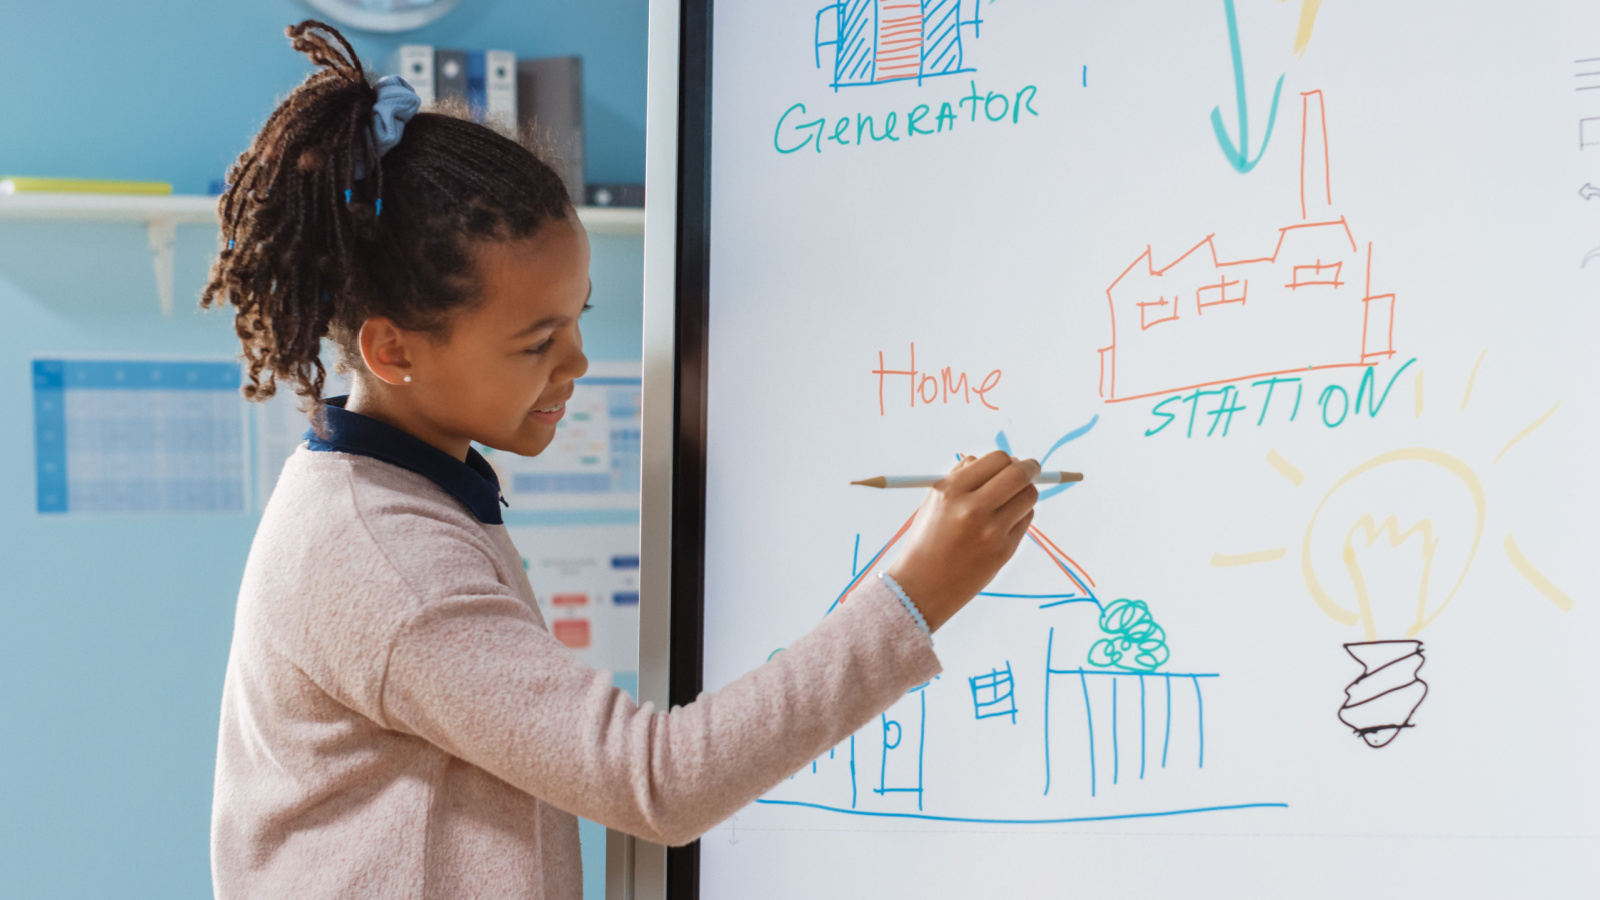 image credit: Gorodenkoff/Shutterstock <p><span>Smart pens capture your handwriting and sketches, converting them into digital files in real time. They’re perfect for students who prefer pen and paper but want the benefits of digital notes. Some models even record audio, syncing it with your notes for a comprehensive review tool. It’s like having a personal assistant meticulously organizing your thoughts.</span></p>